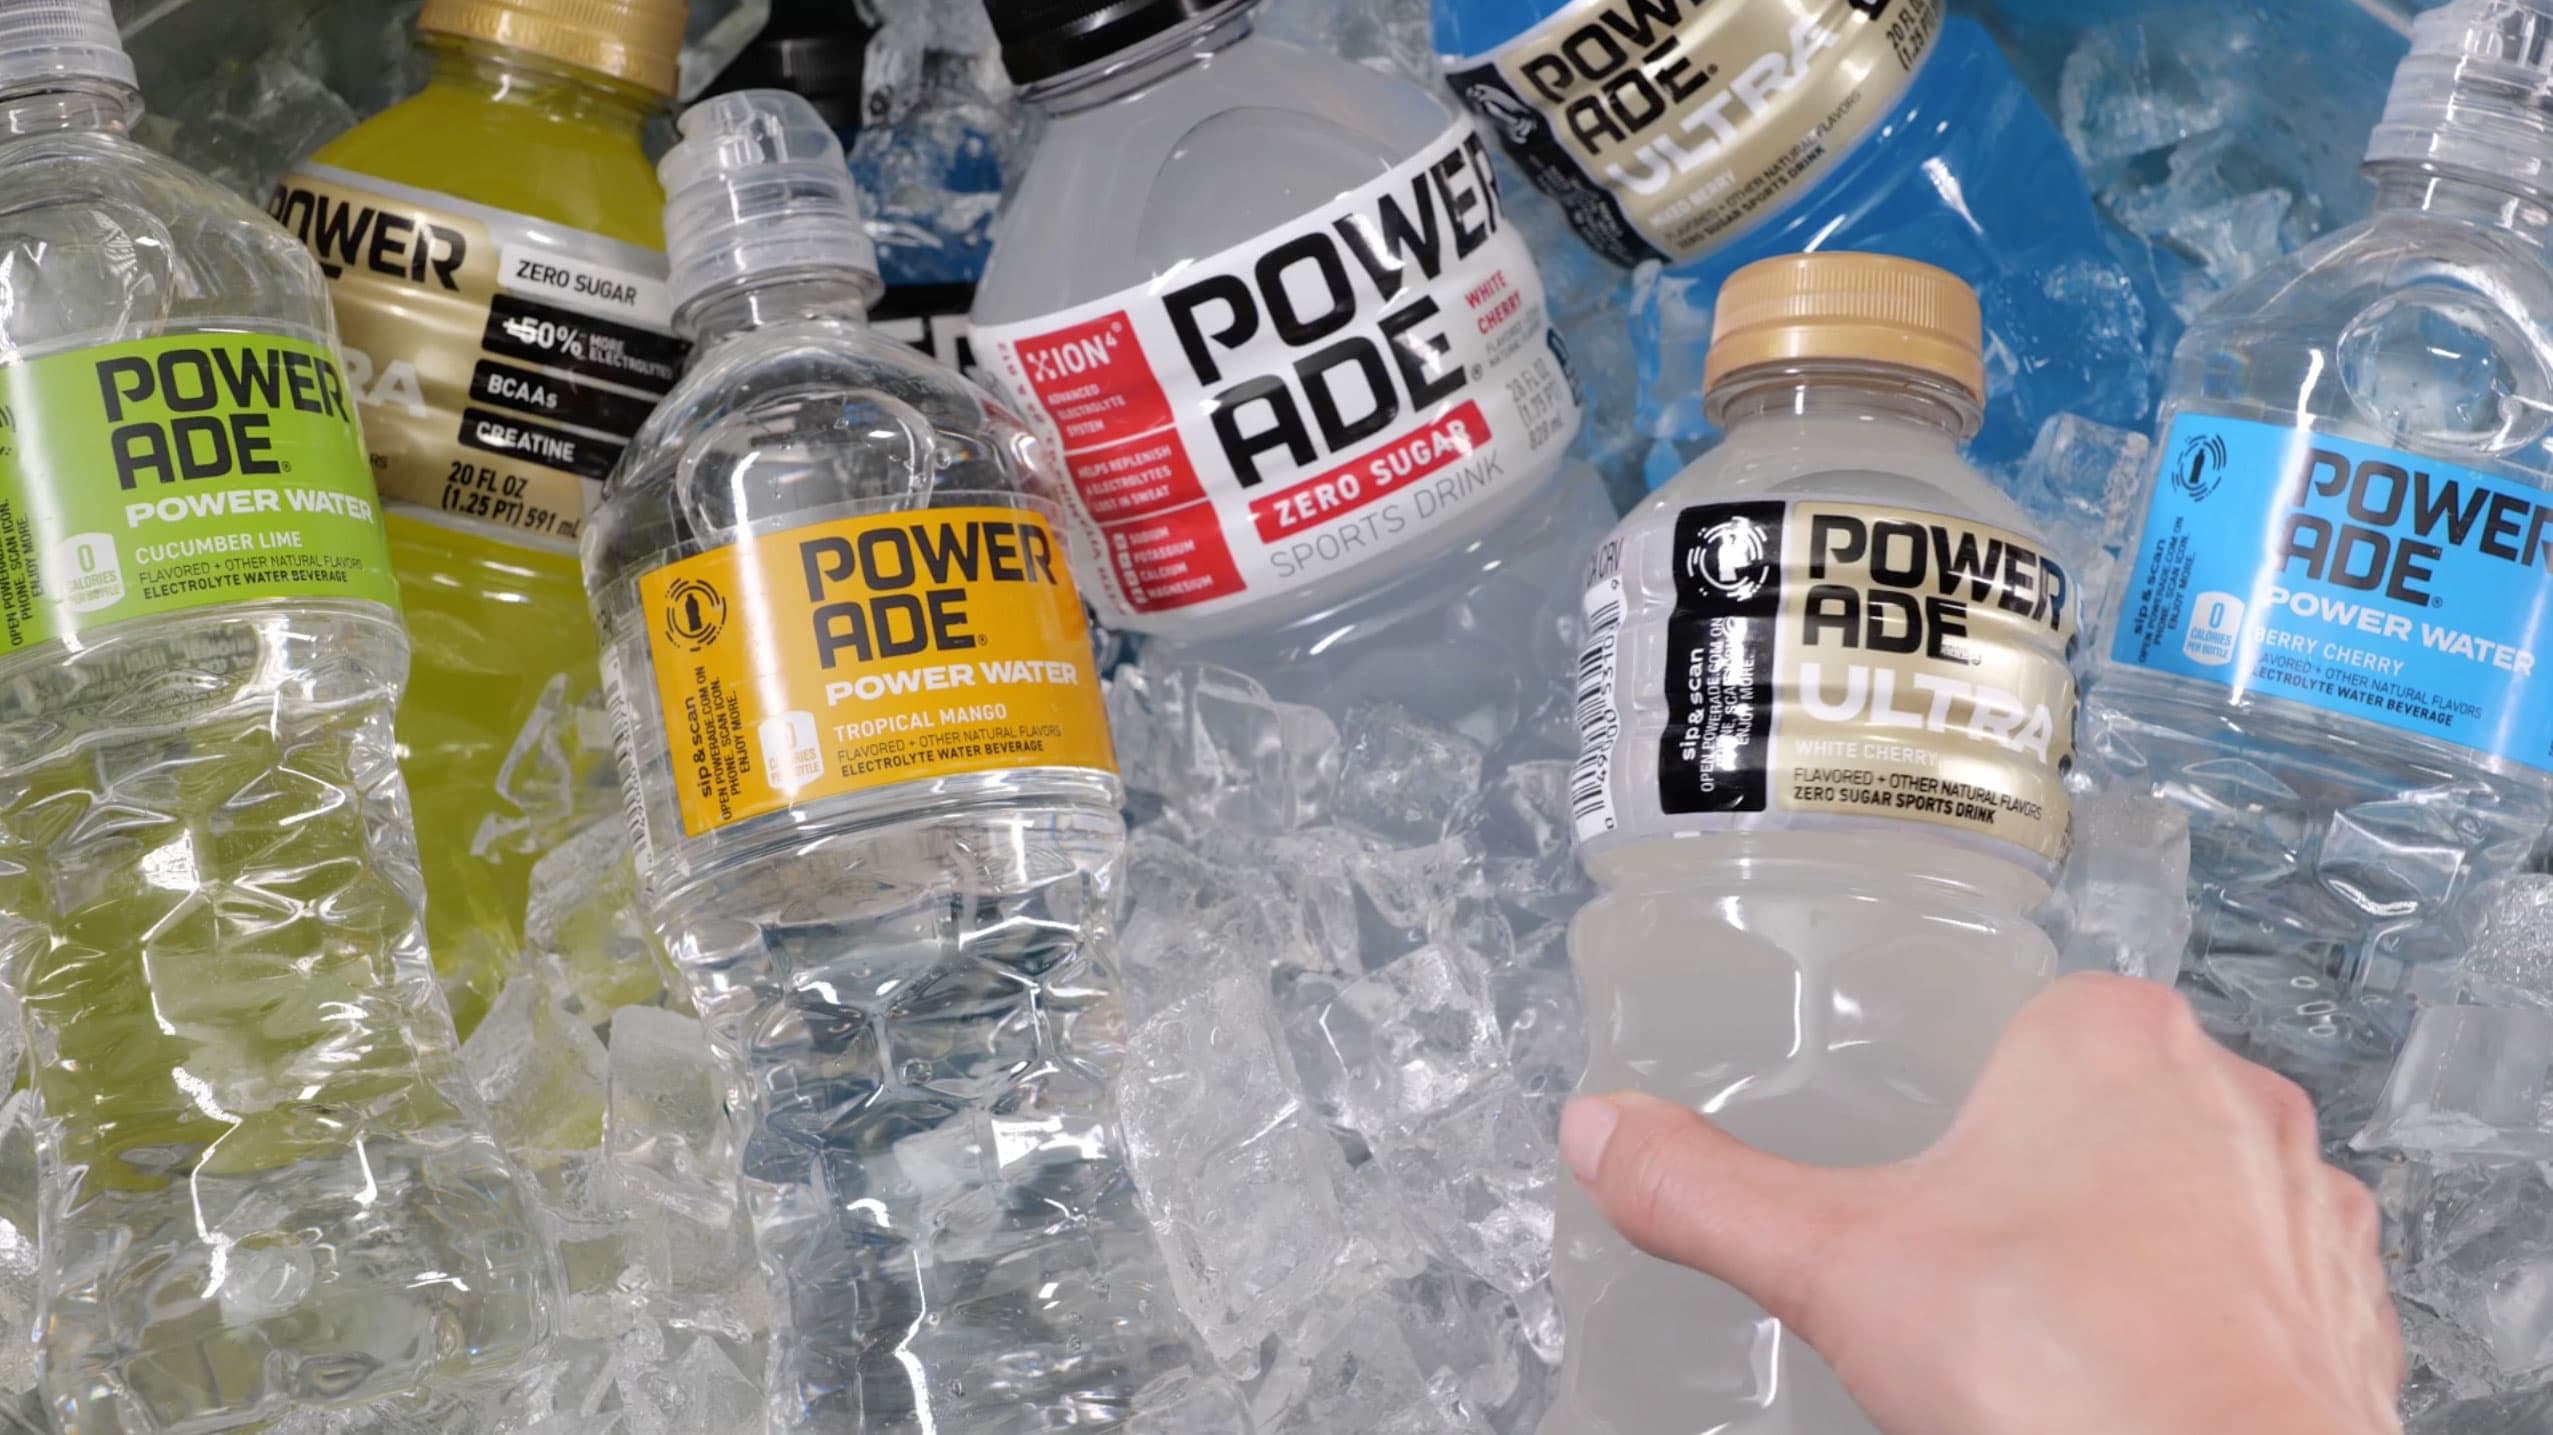 Gatorade And Powerade Try To Adapt As Sports Drinks Sales Decline